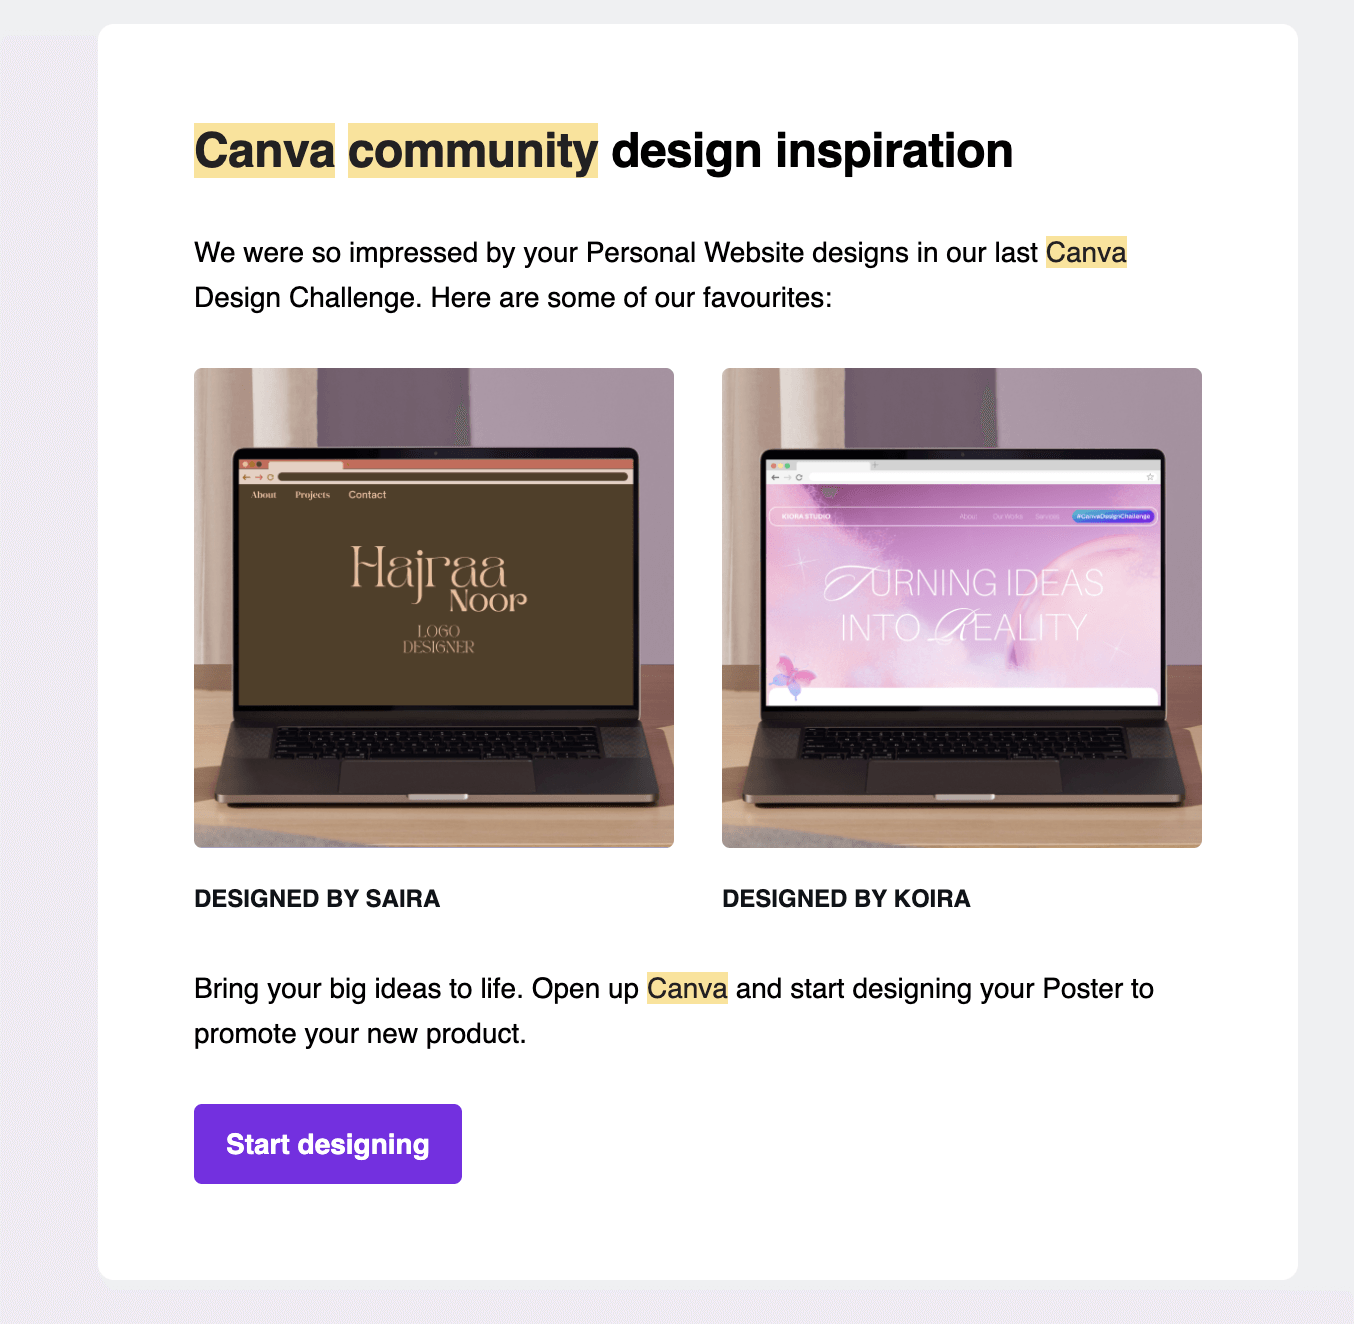 Case Study Email Examples: Screenshot of Canva's email showcasing creatives created by their customers